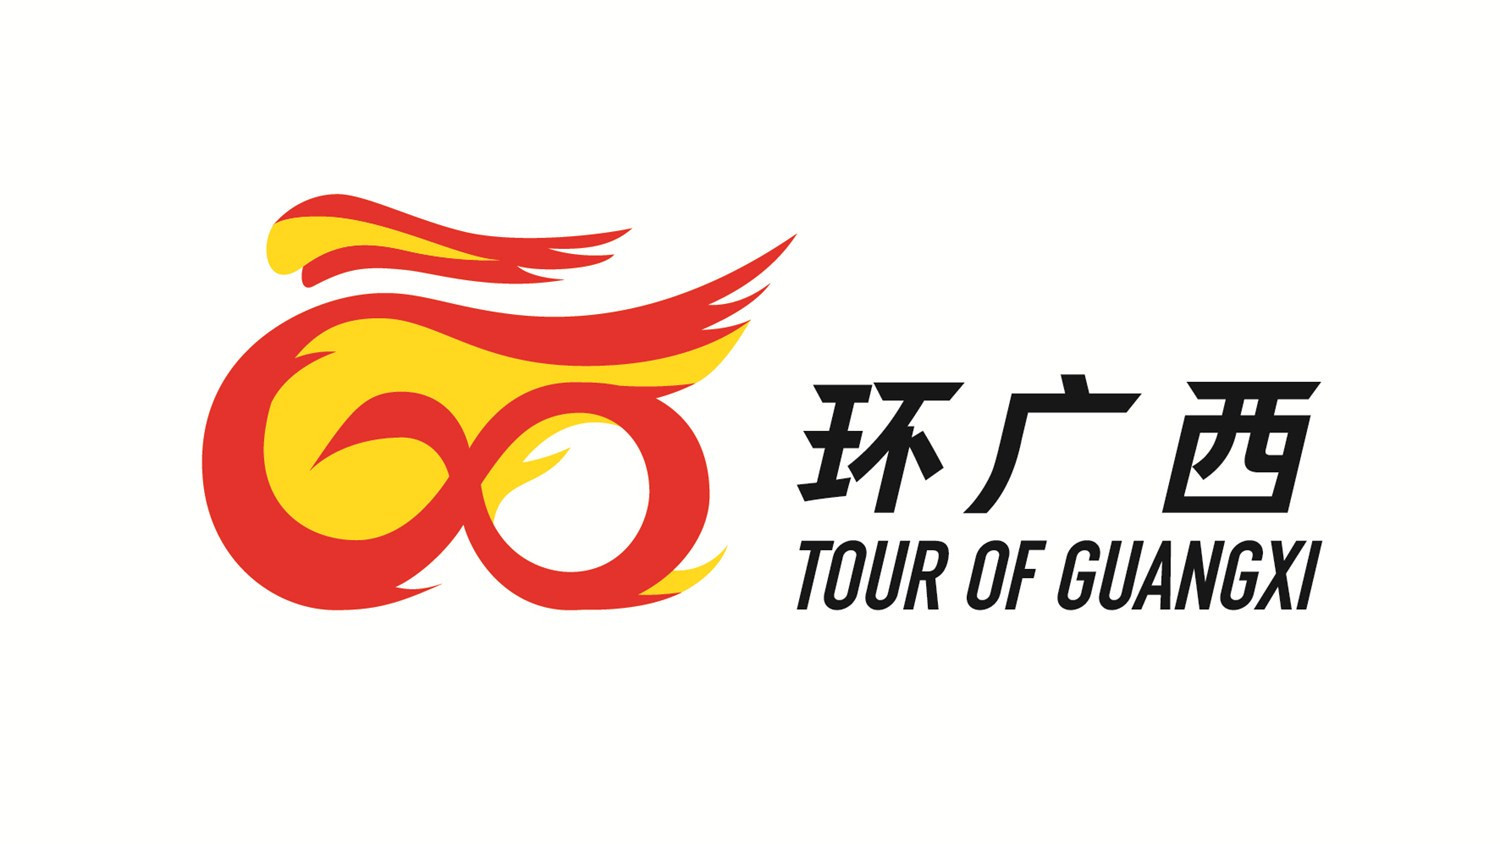 UCI World Tour set to reach its climax in Guangxi 